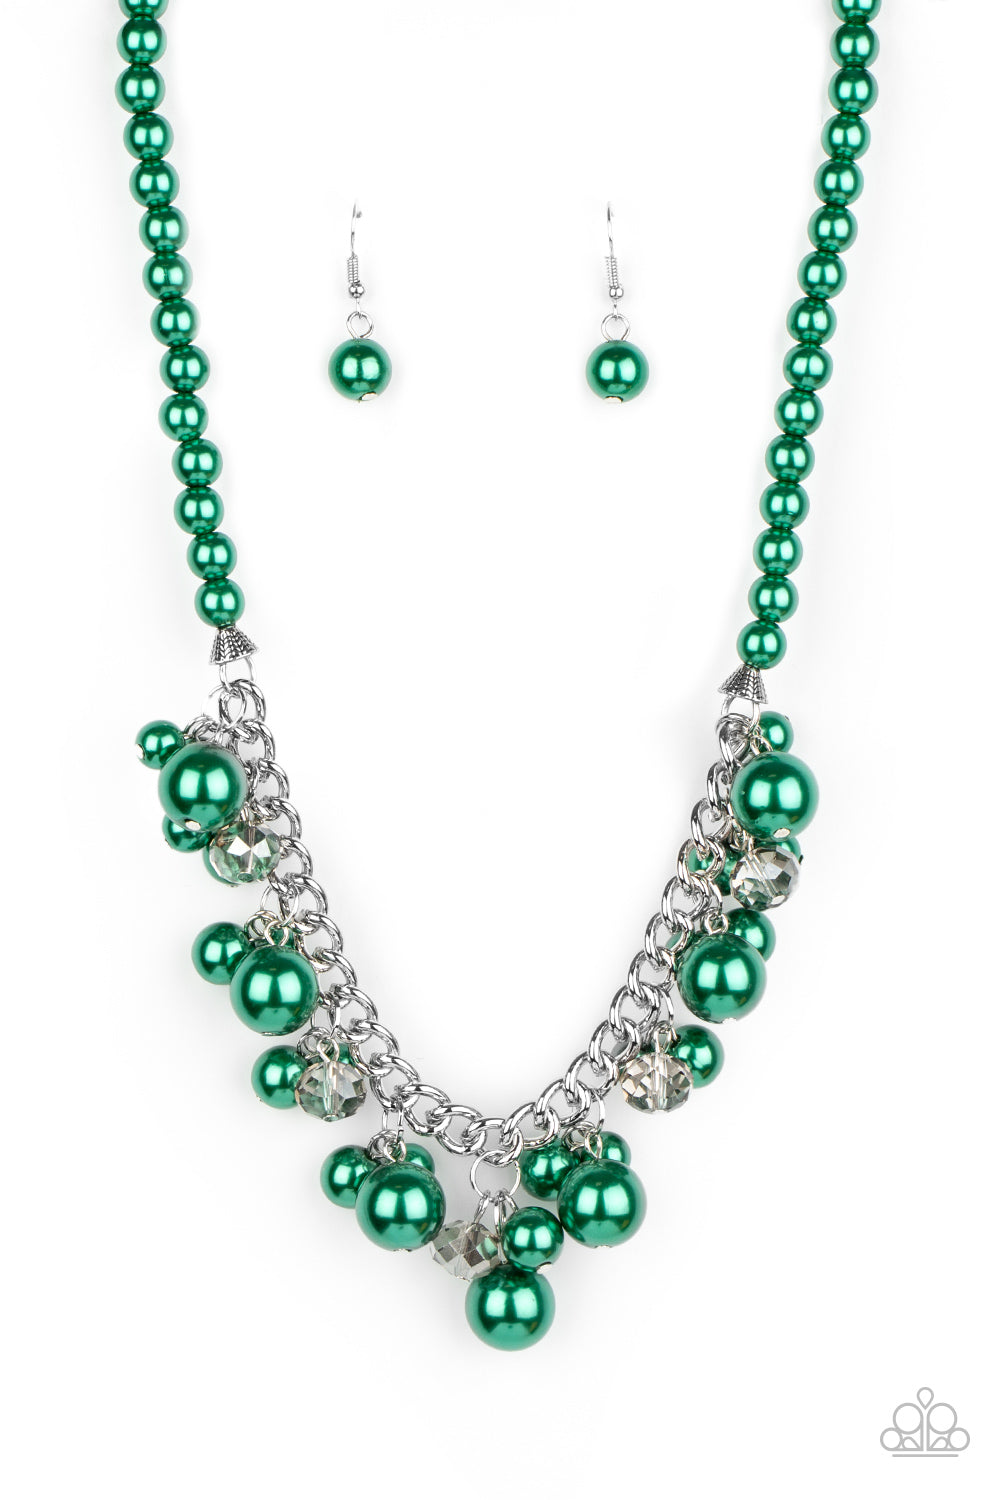 Prim and POLISHED - Green necklace